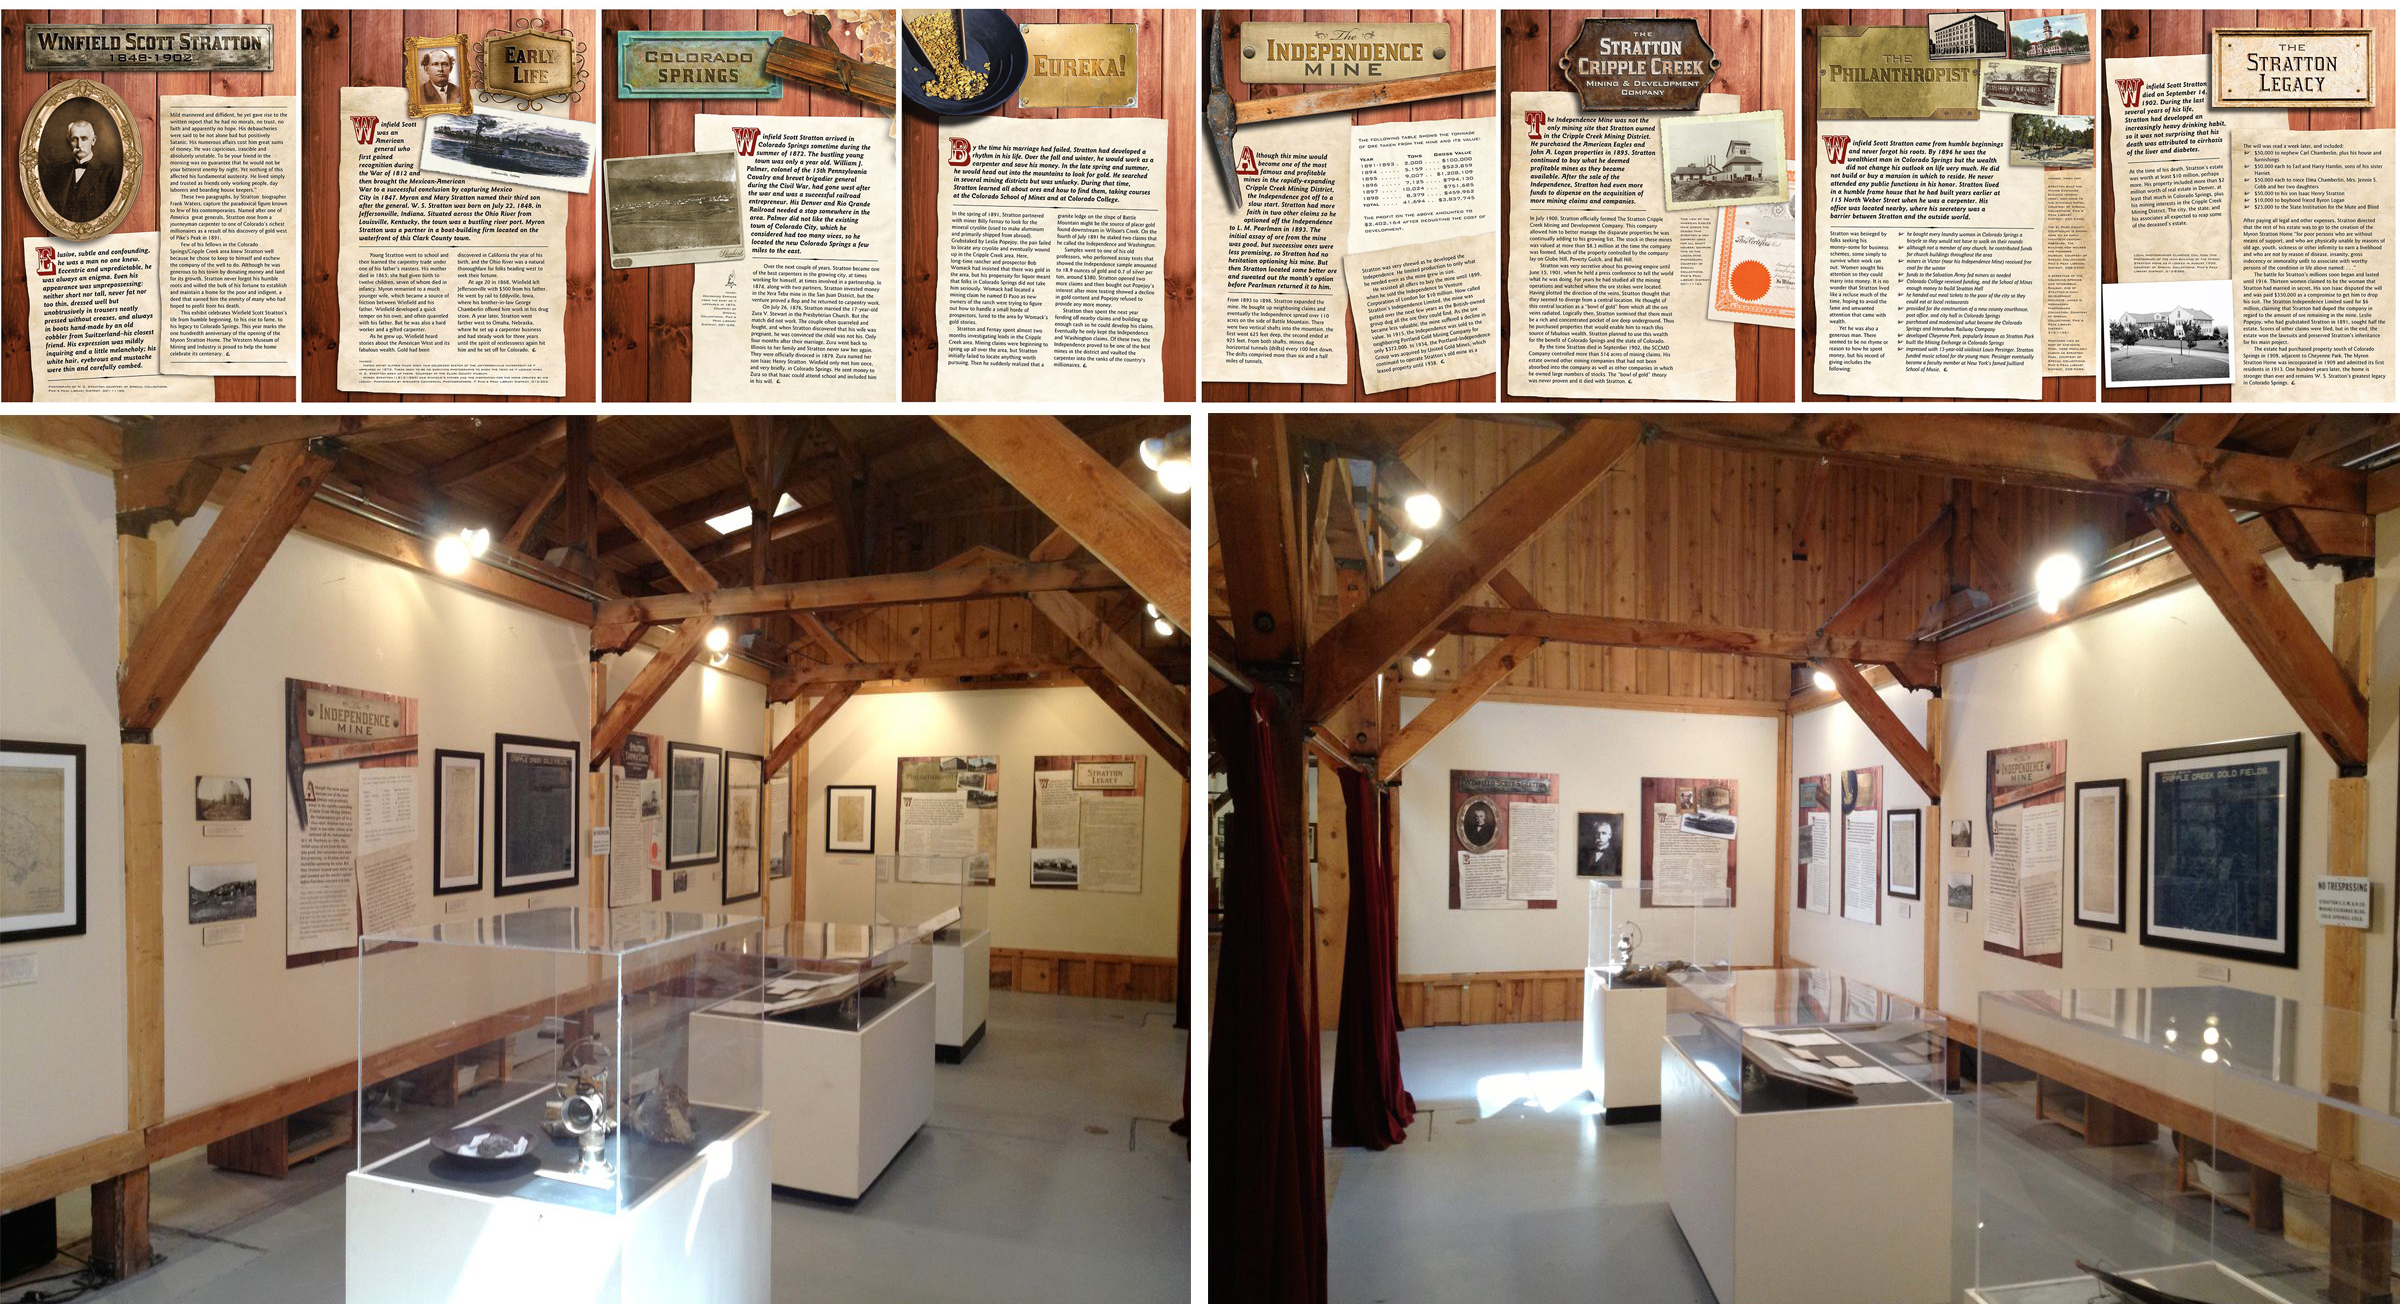 Western Museum of Mining and Industry exhibit panels for Winfield Scott Strattons Legacy